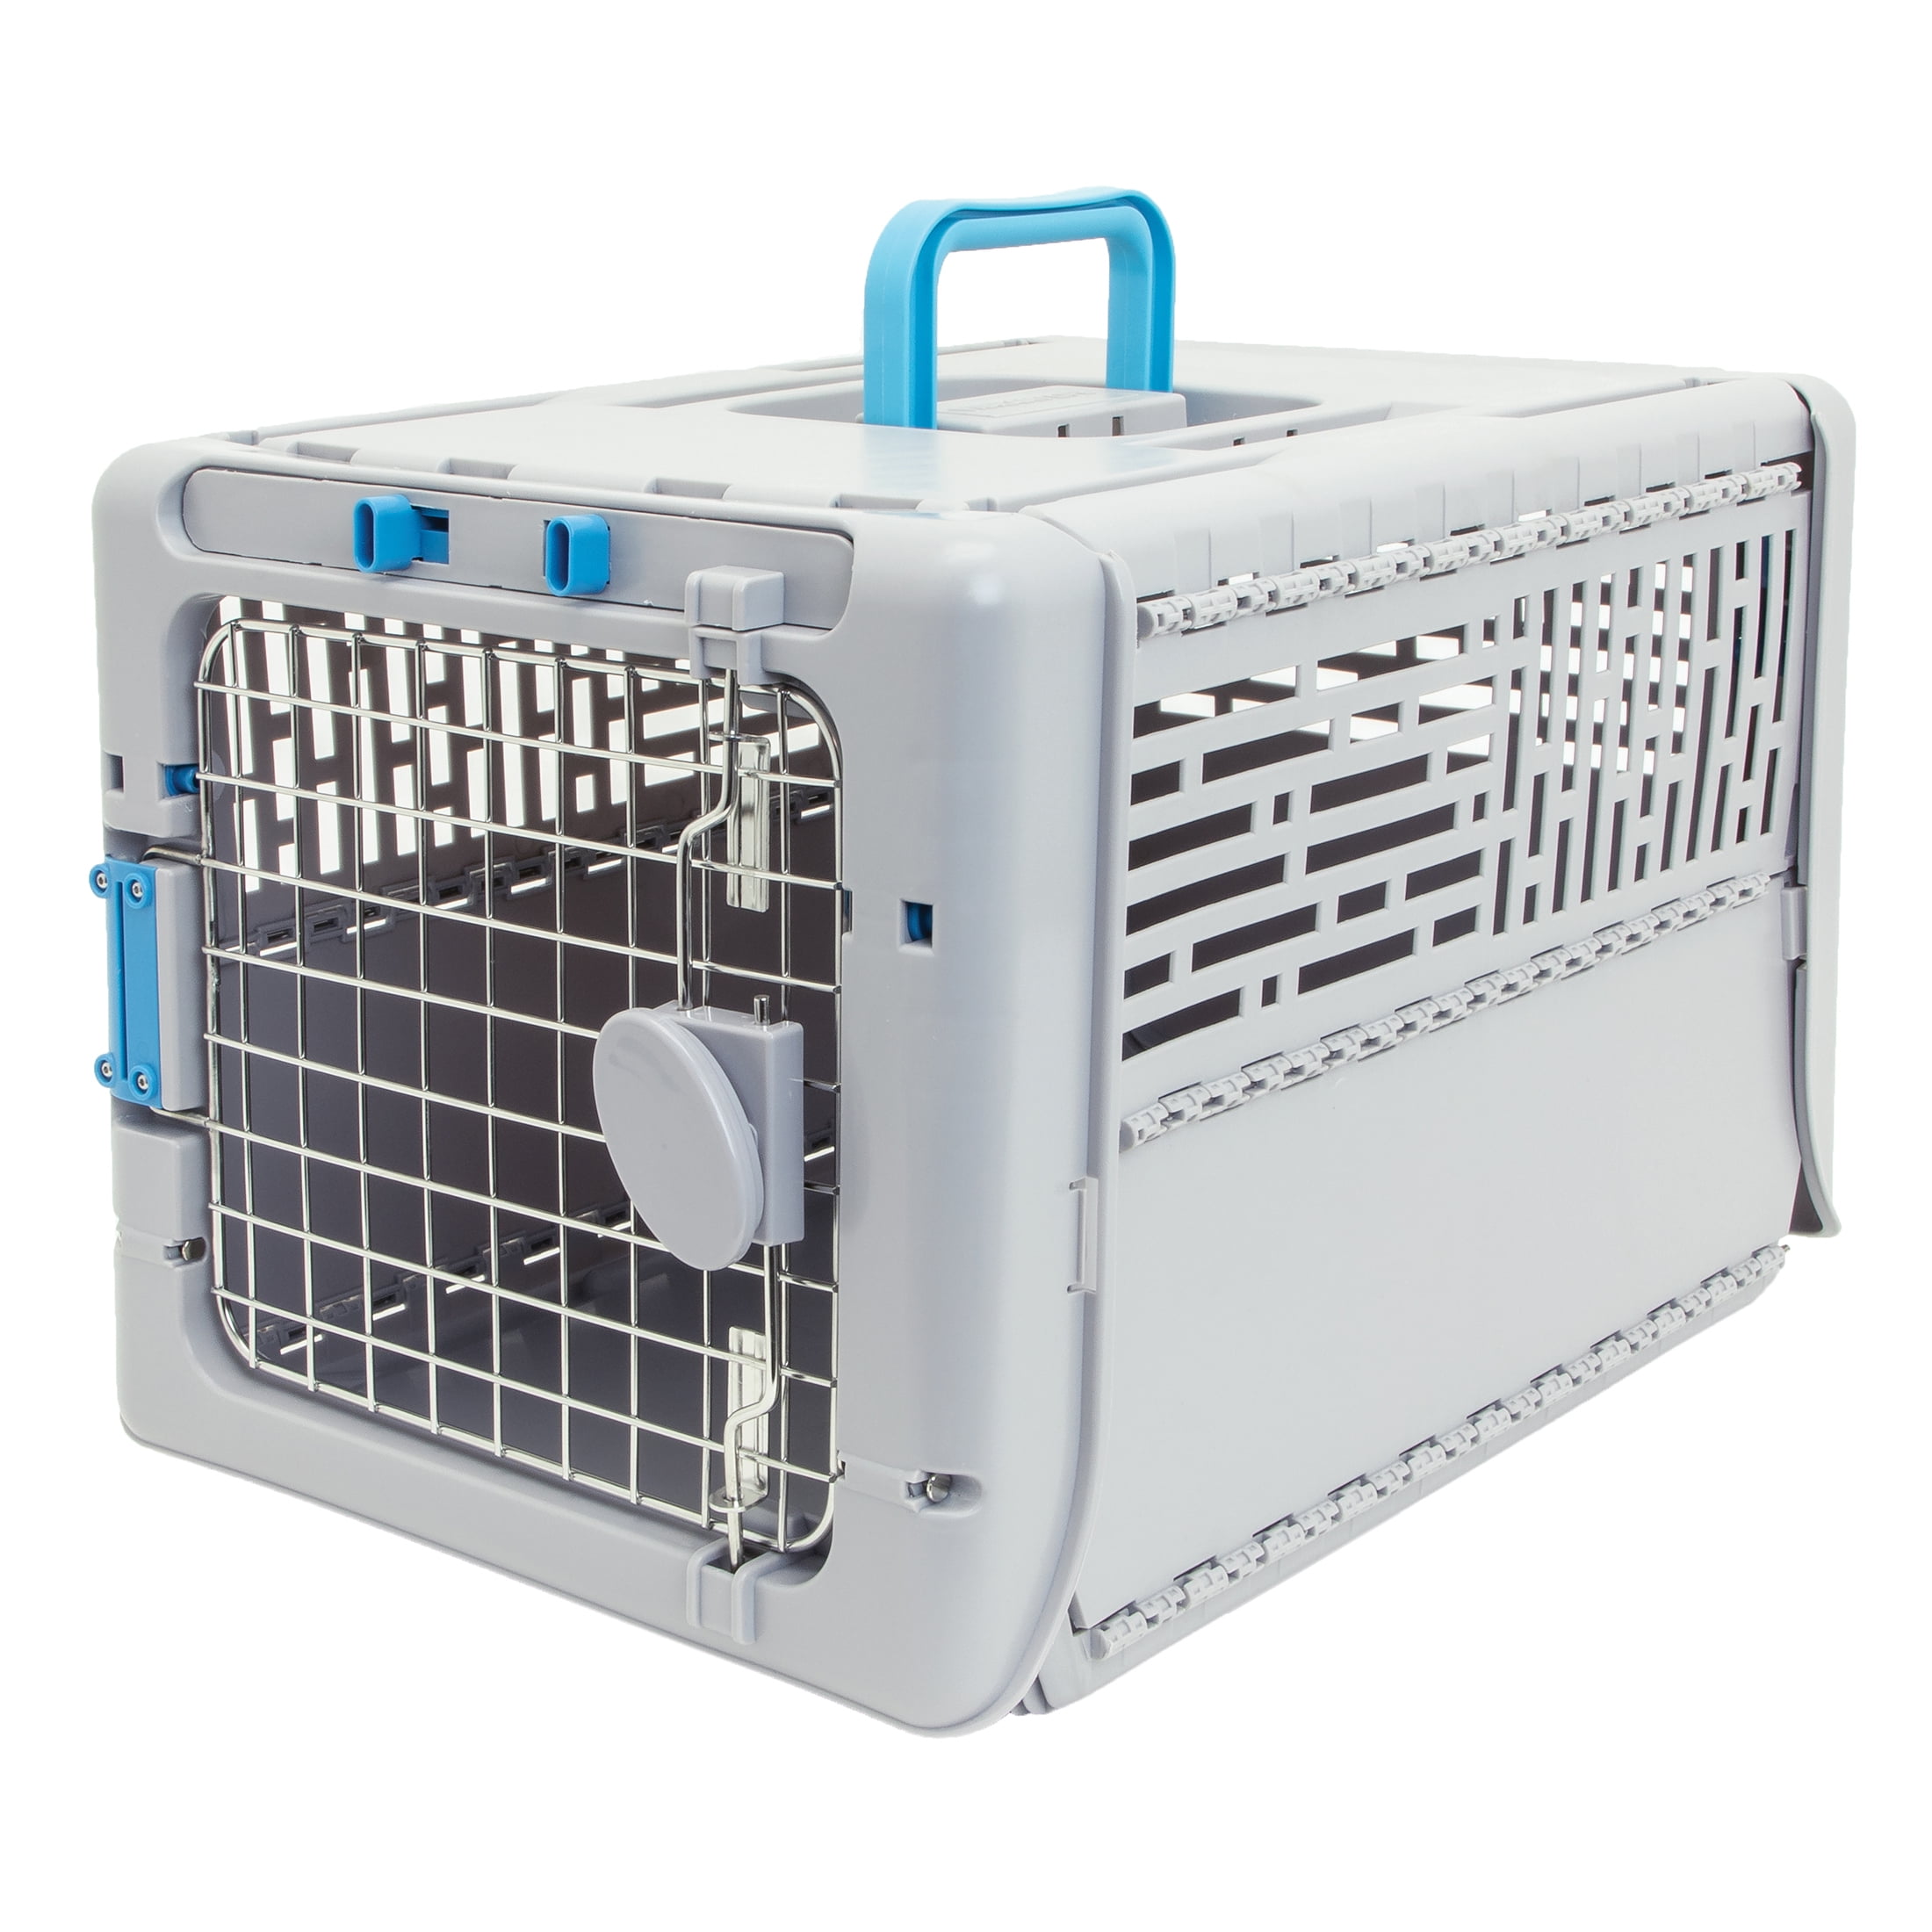 SportPet Small 19" Collapsible Plastic Pet Kennel, Pet Carrier, Dog, Cat, Small Animal